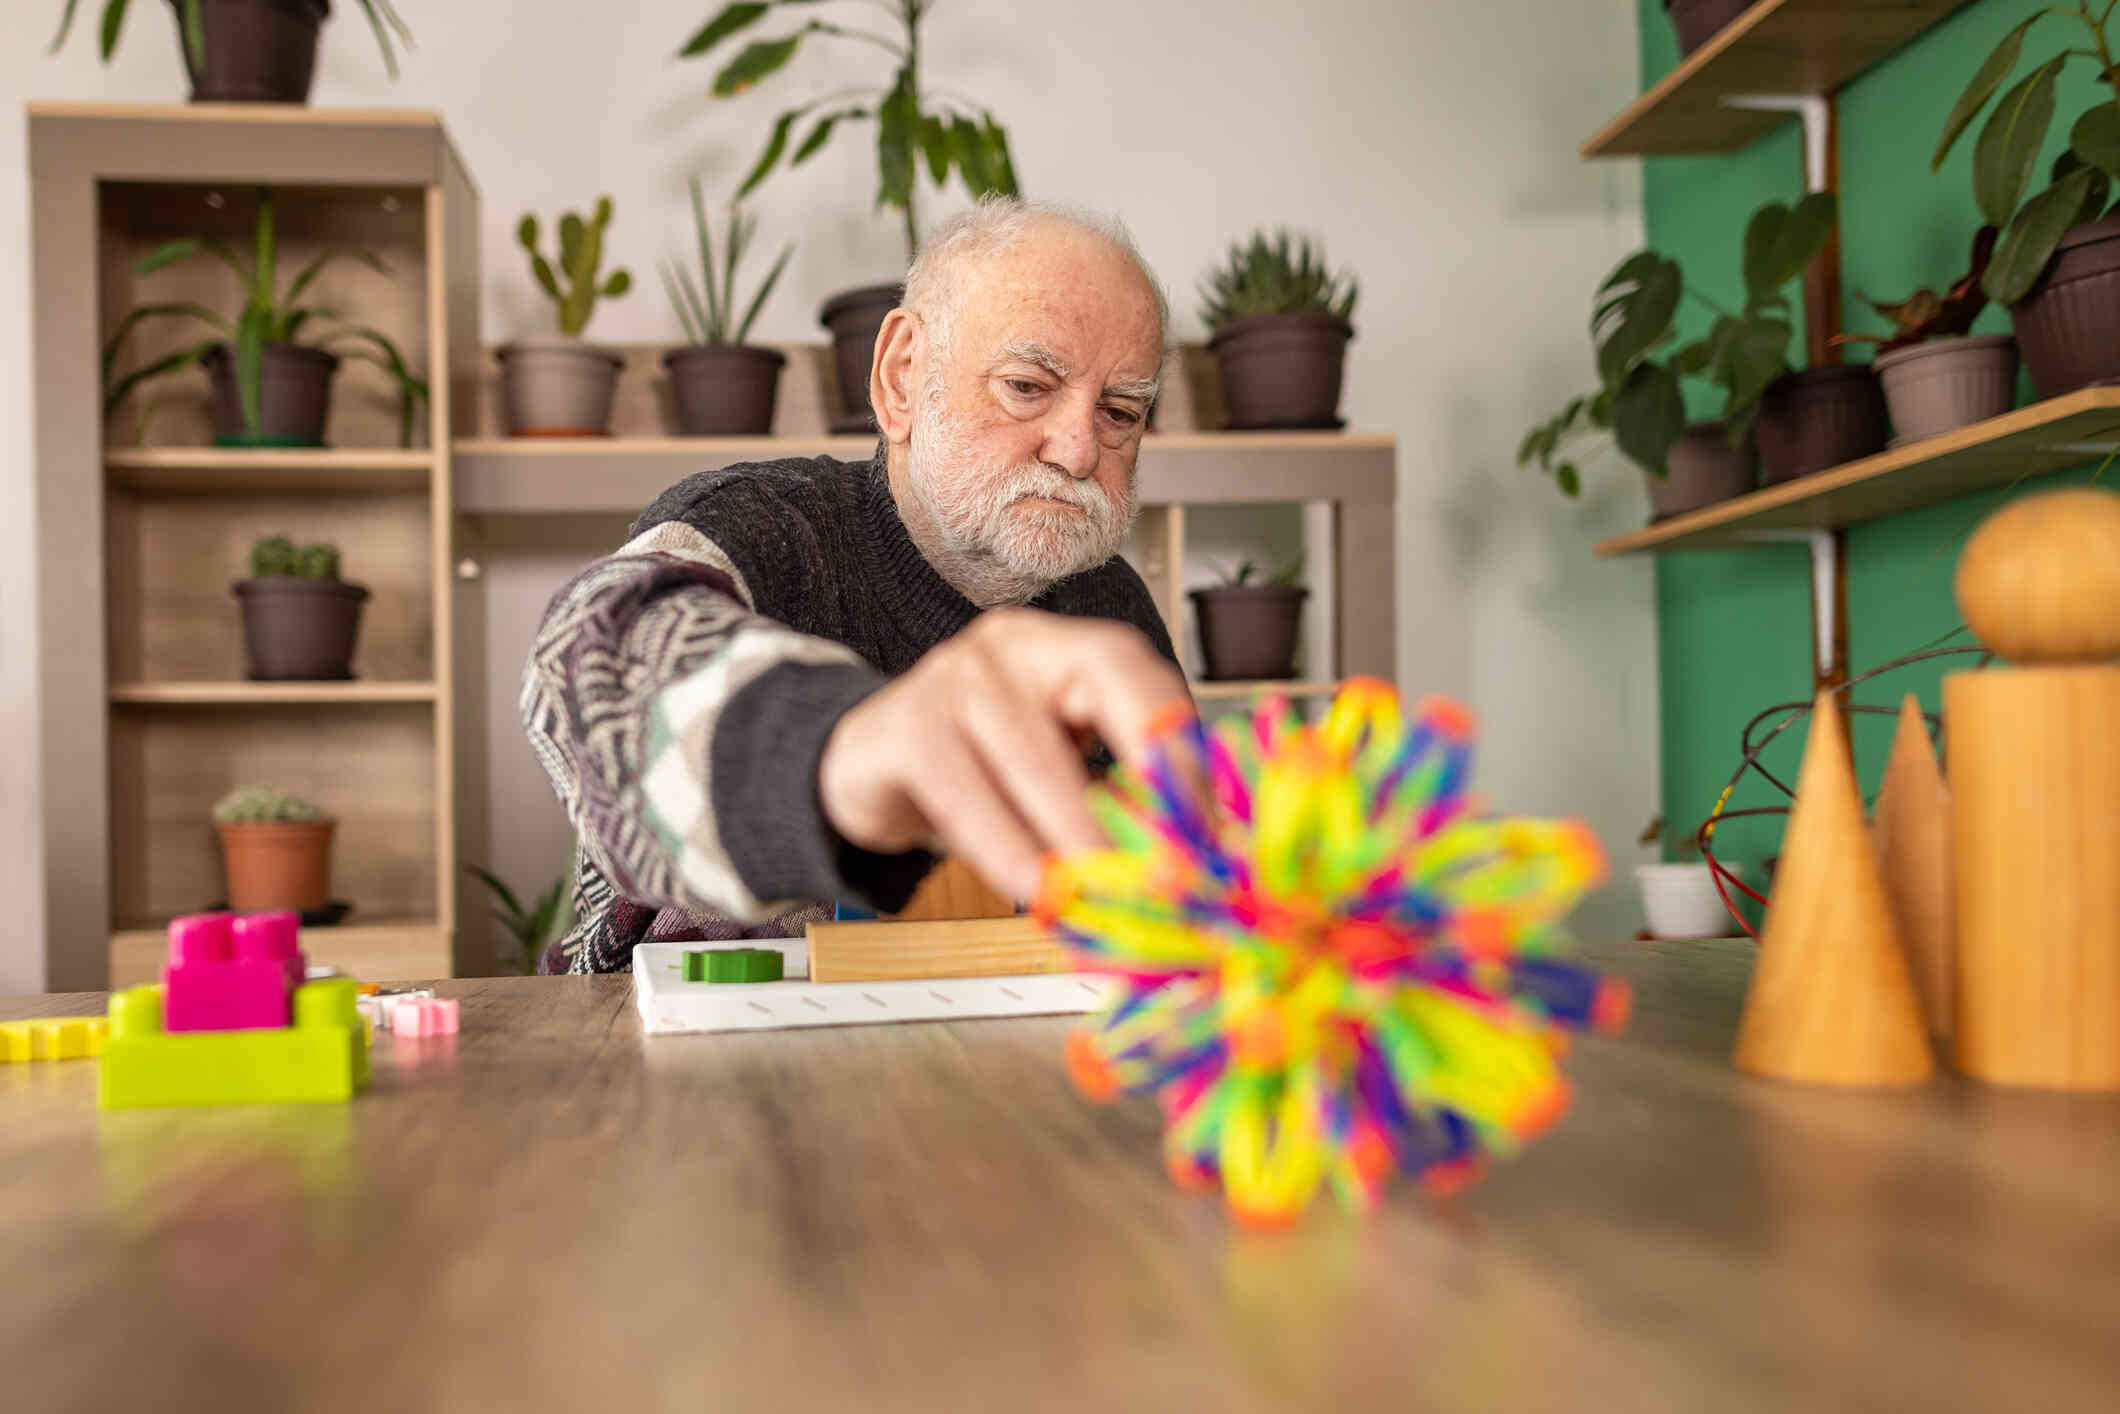 An elderly man sits at a wooden table and reaches for a toy infront of him.